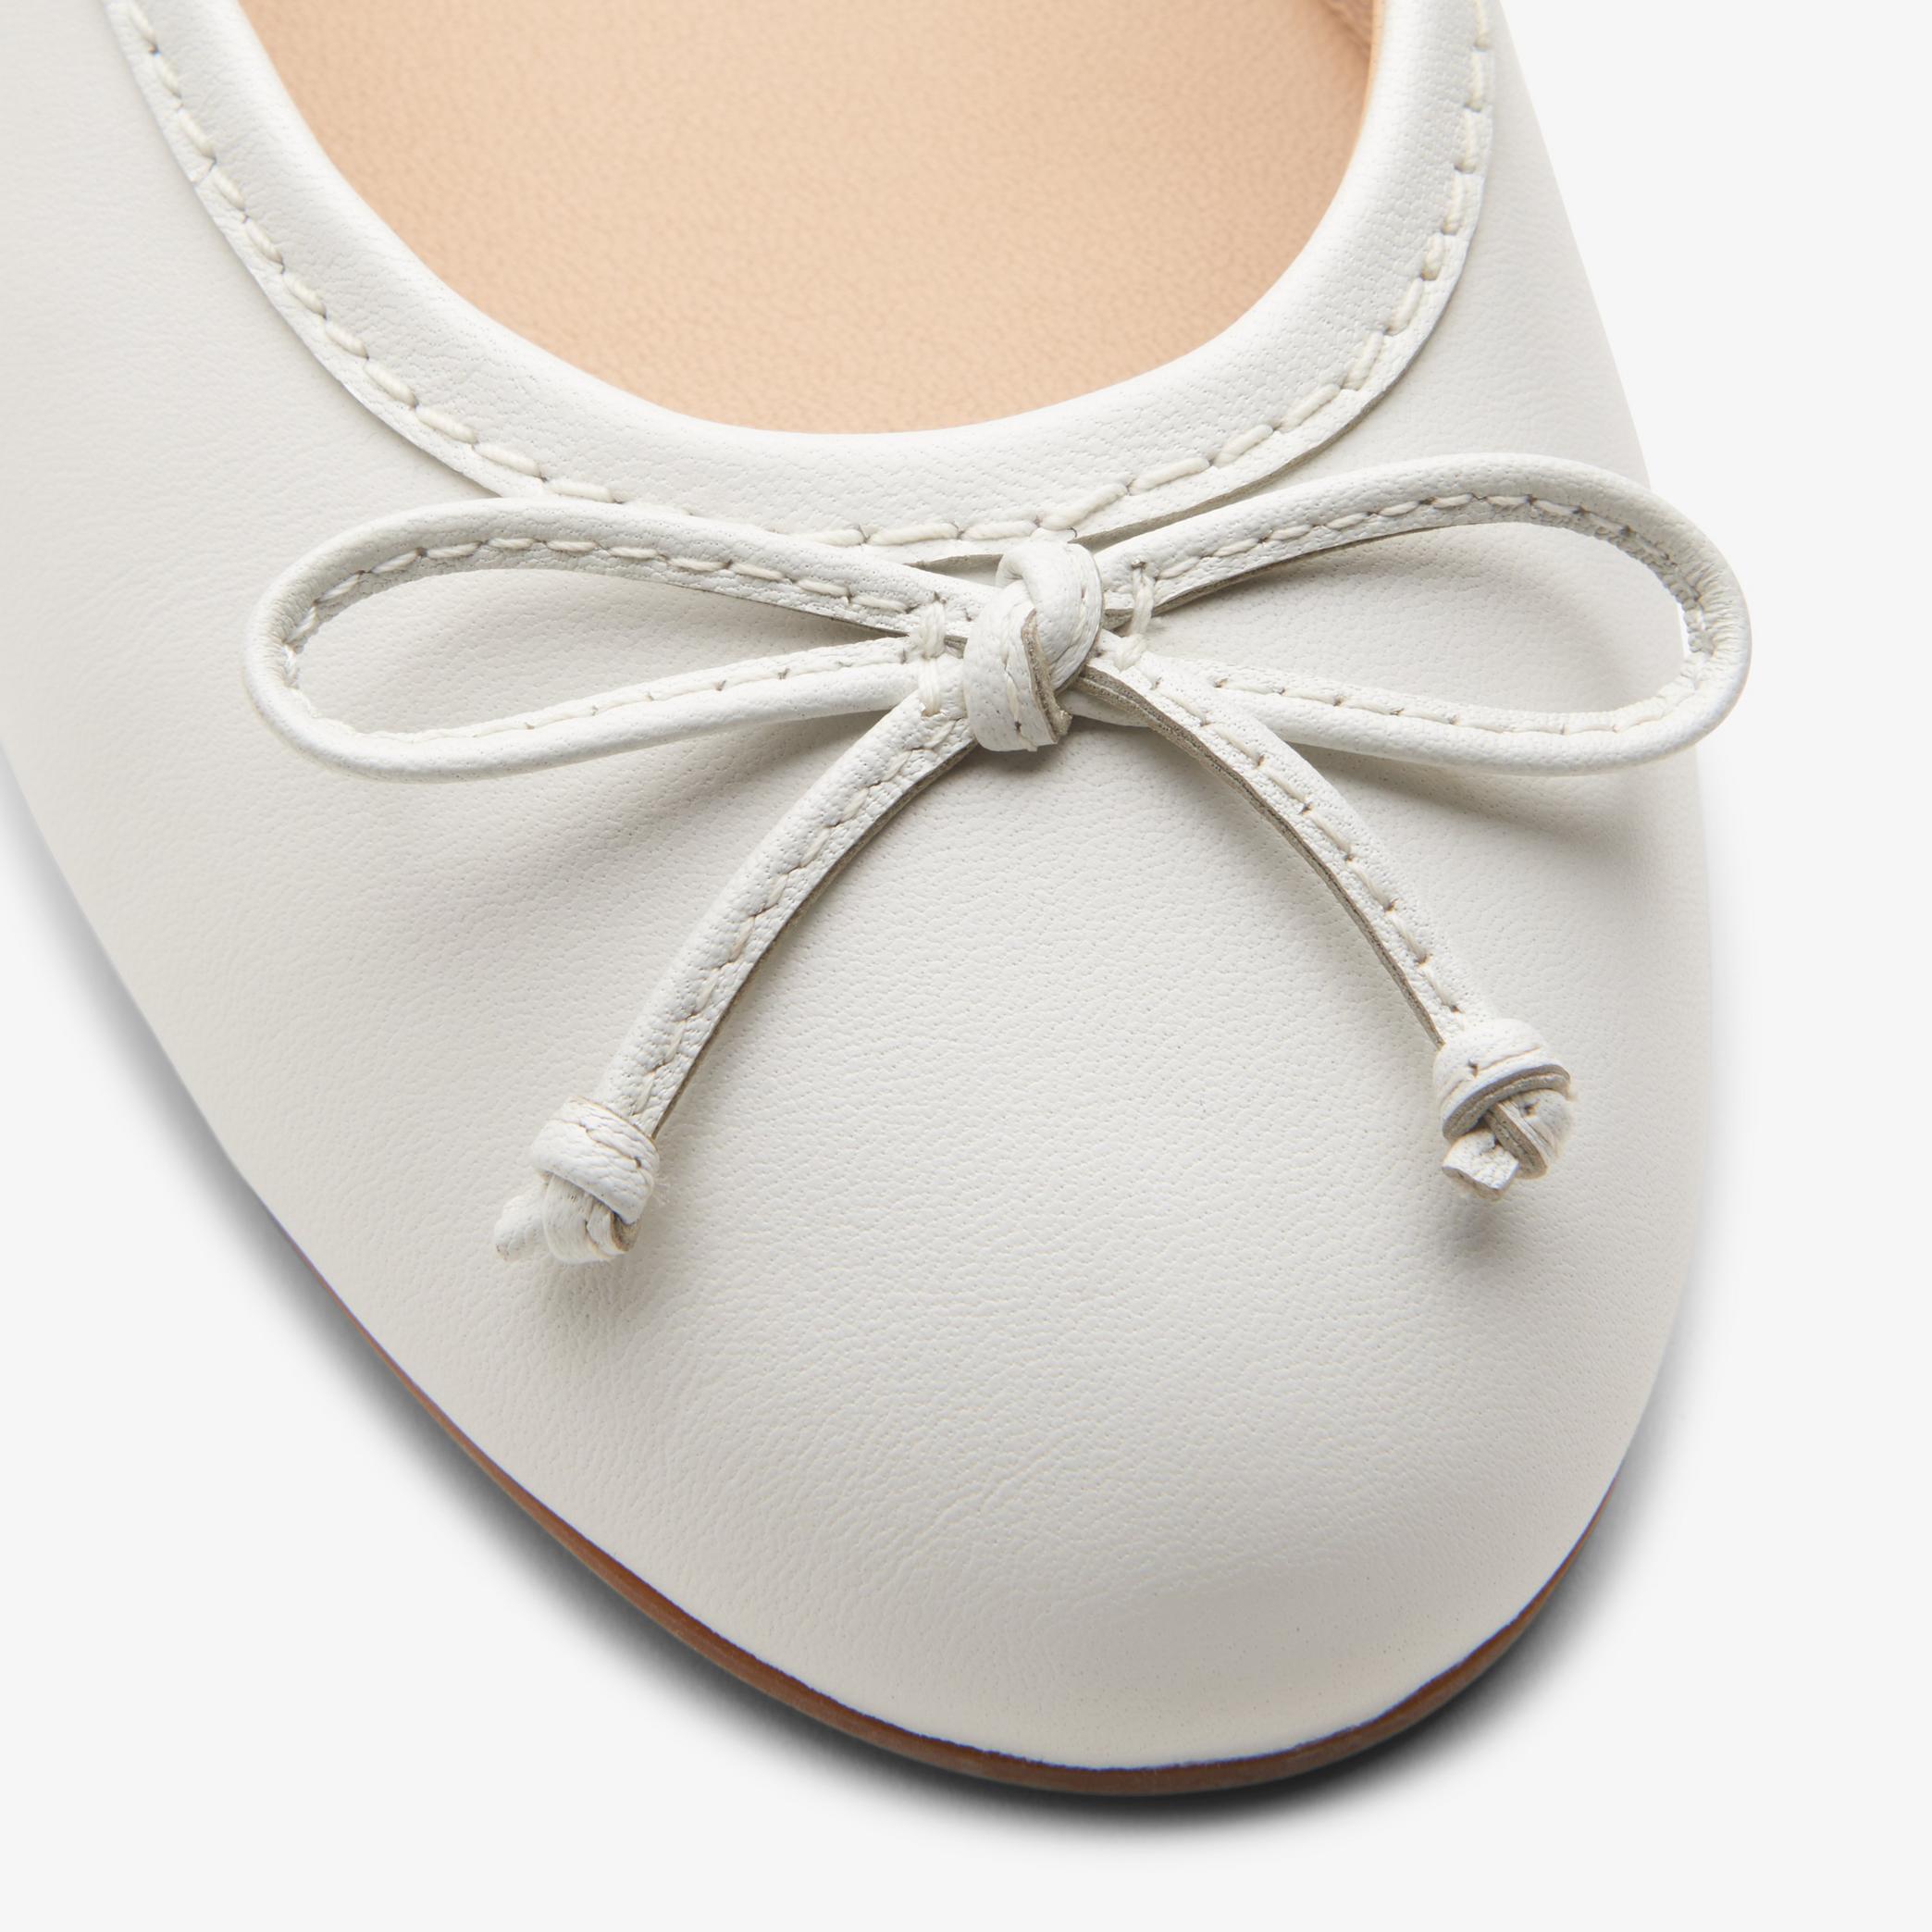 FAWNA LILY White Leather Ballerina, view 10 of 10